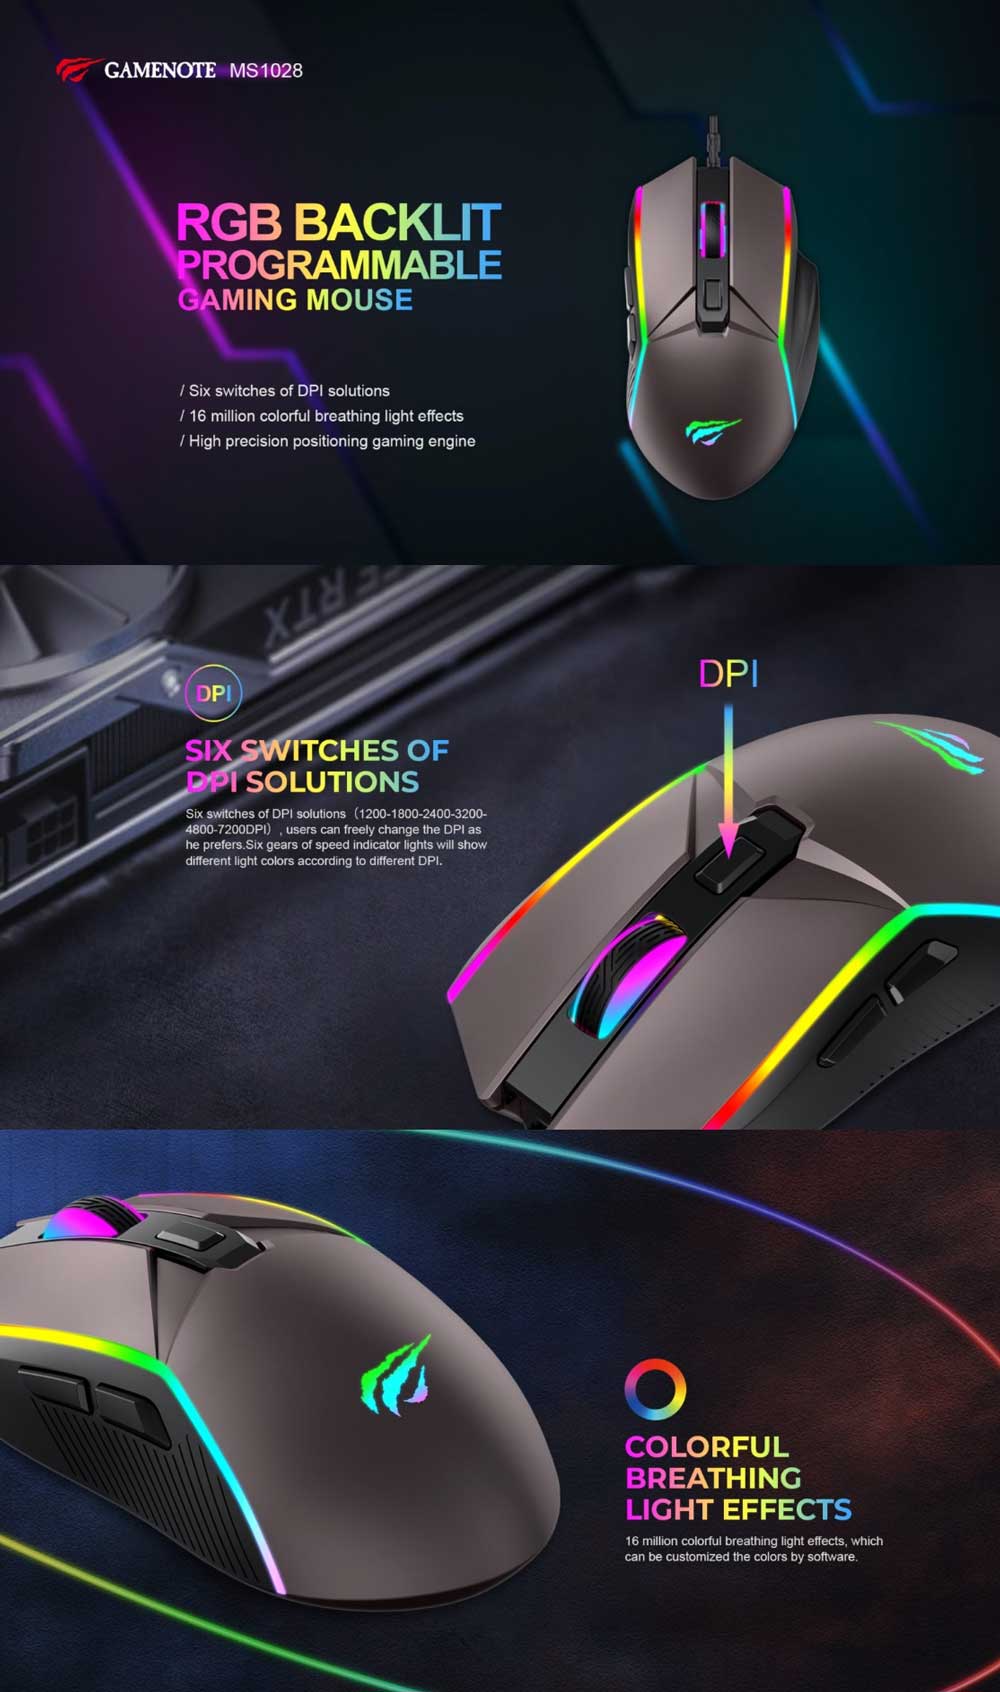 Havit MS1028 RGB Backlit Programmable Gaming Mouse 6